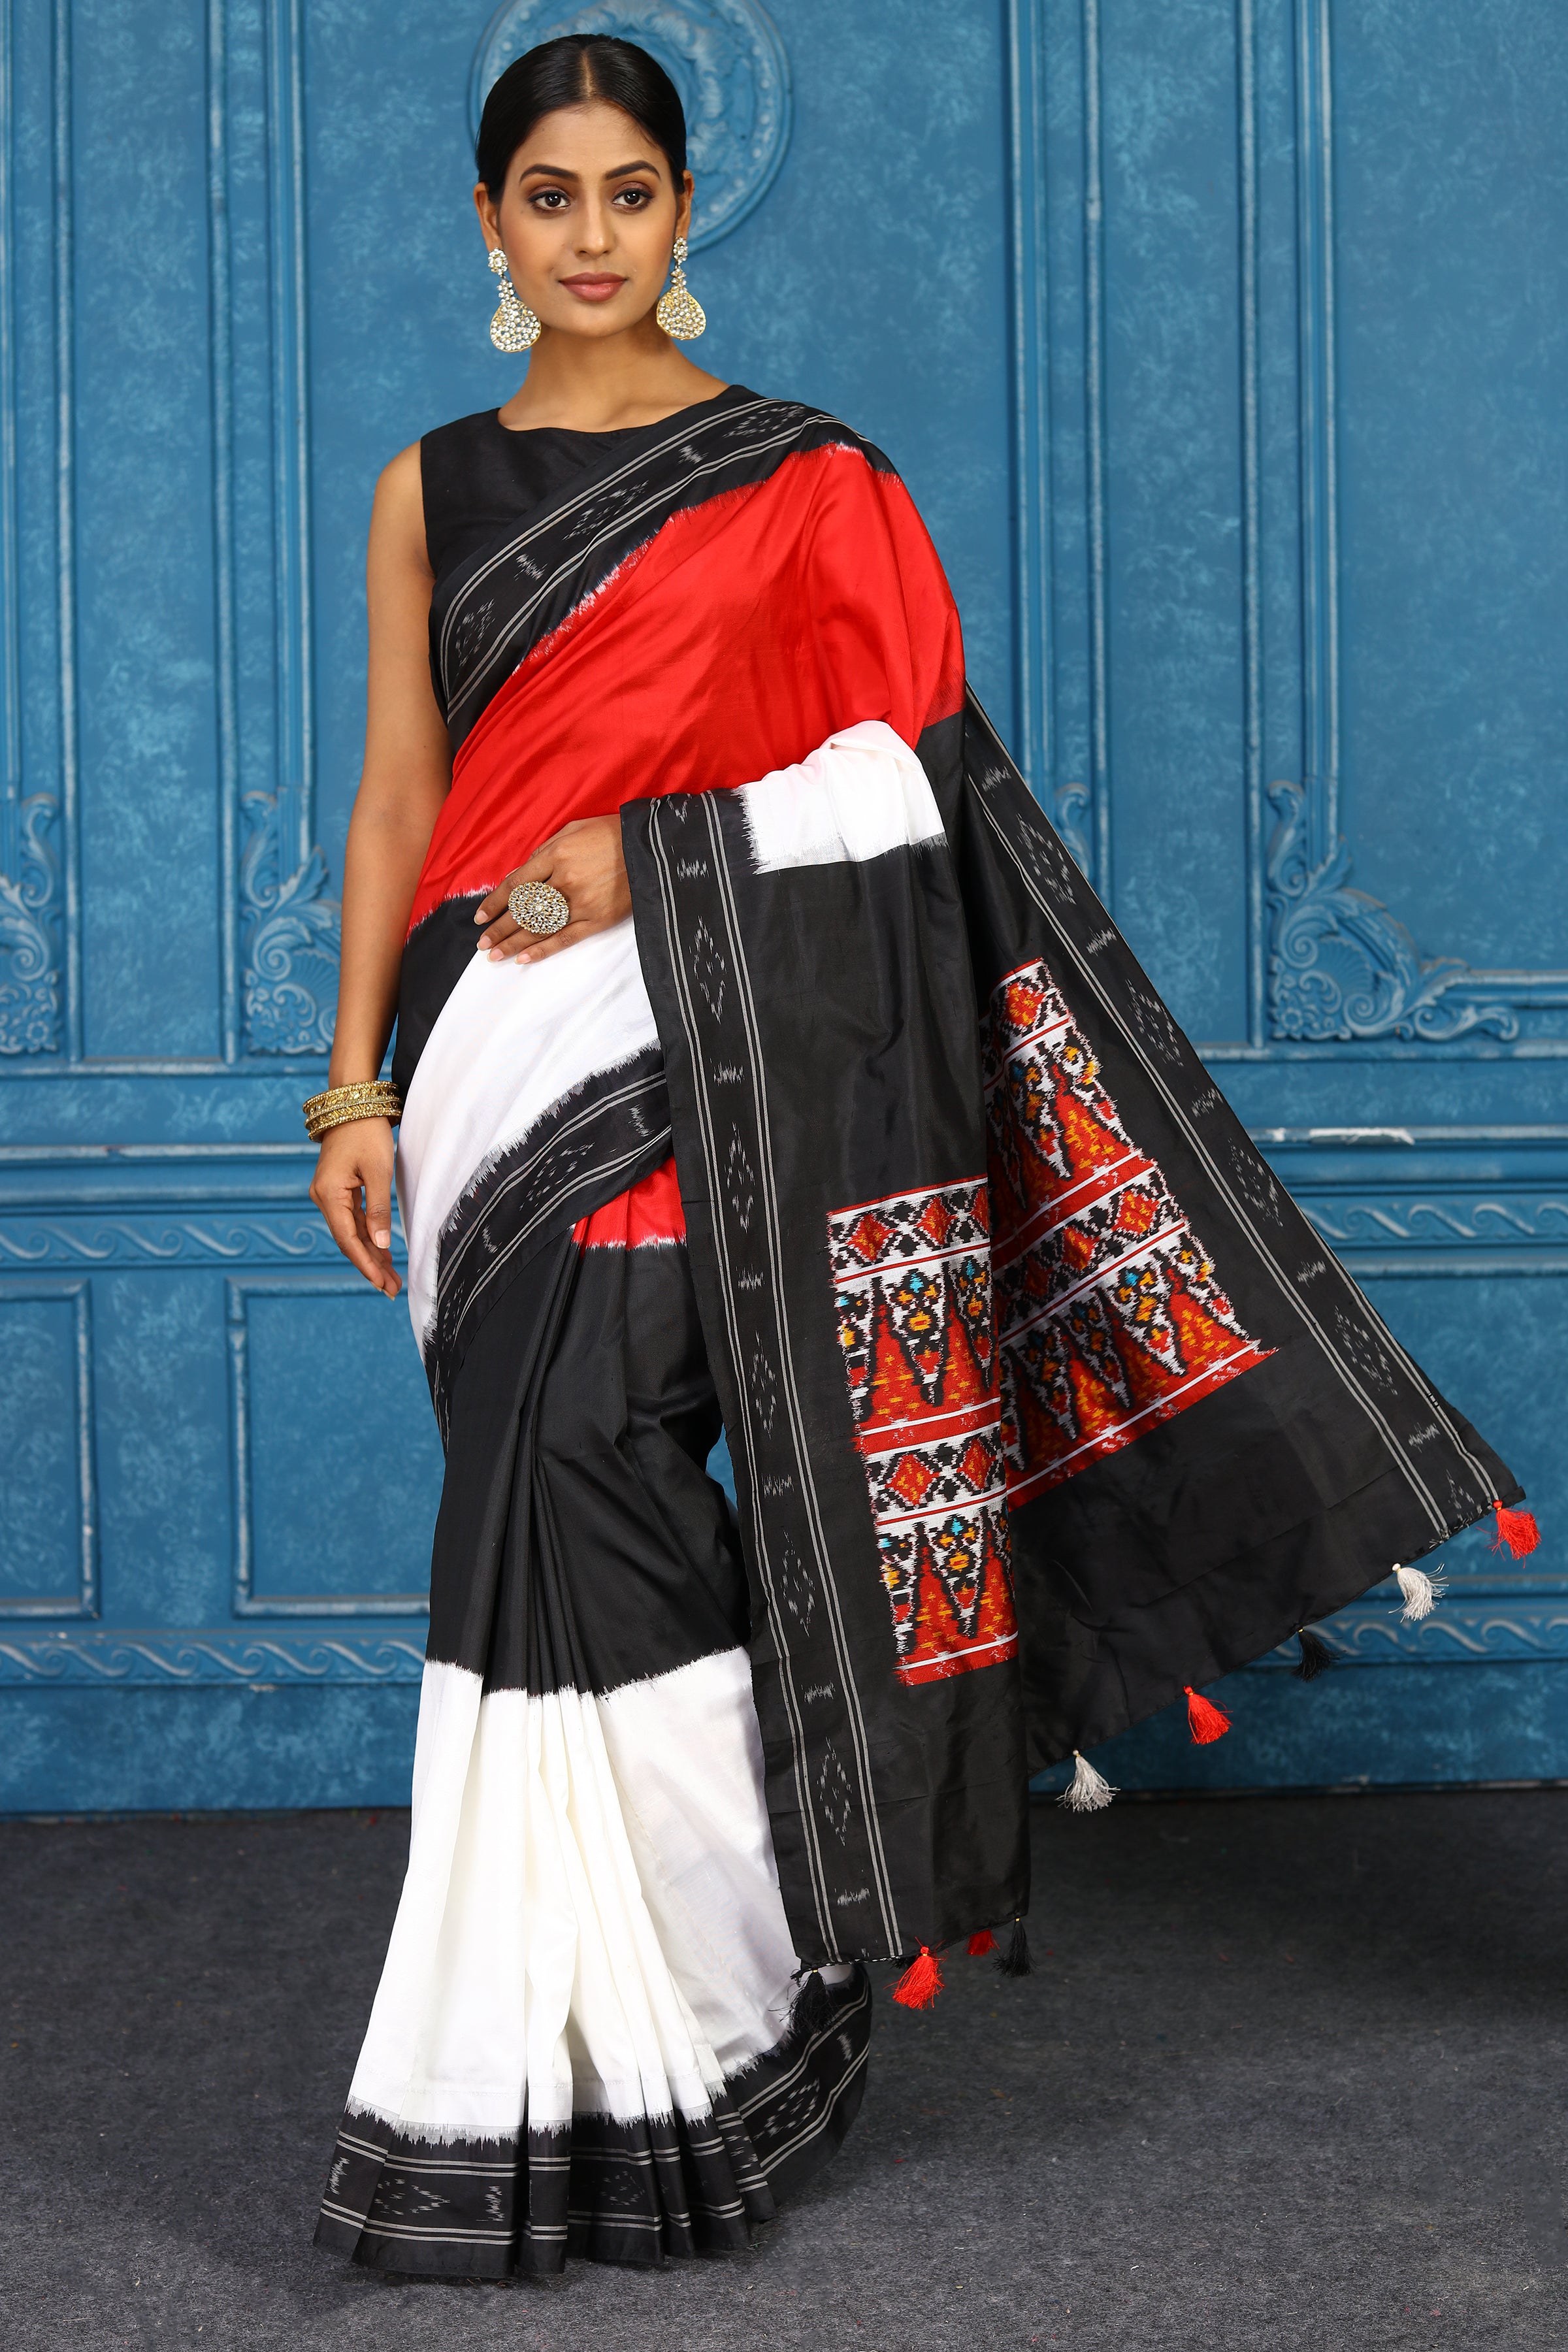 Shop black, white and red pochampally silk ikkat sari online in USA. Look your best on festive occasions in latest designer sarees, pure silk sarees, Kanchipuram sarees, handwoven sarees, tussar silk sarees, embroidered sarees from Pure Elegance Indian clothing store in USA.-full view